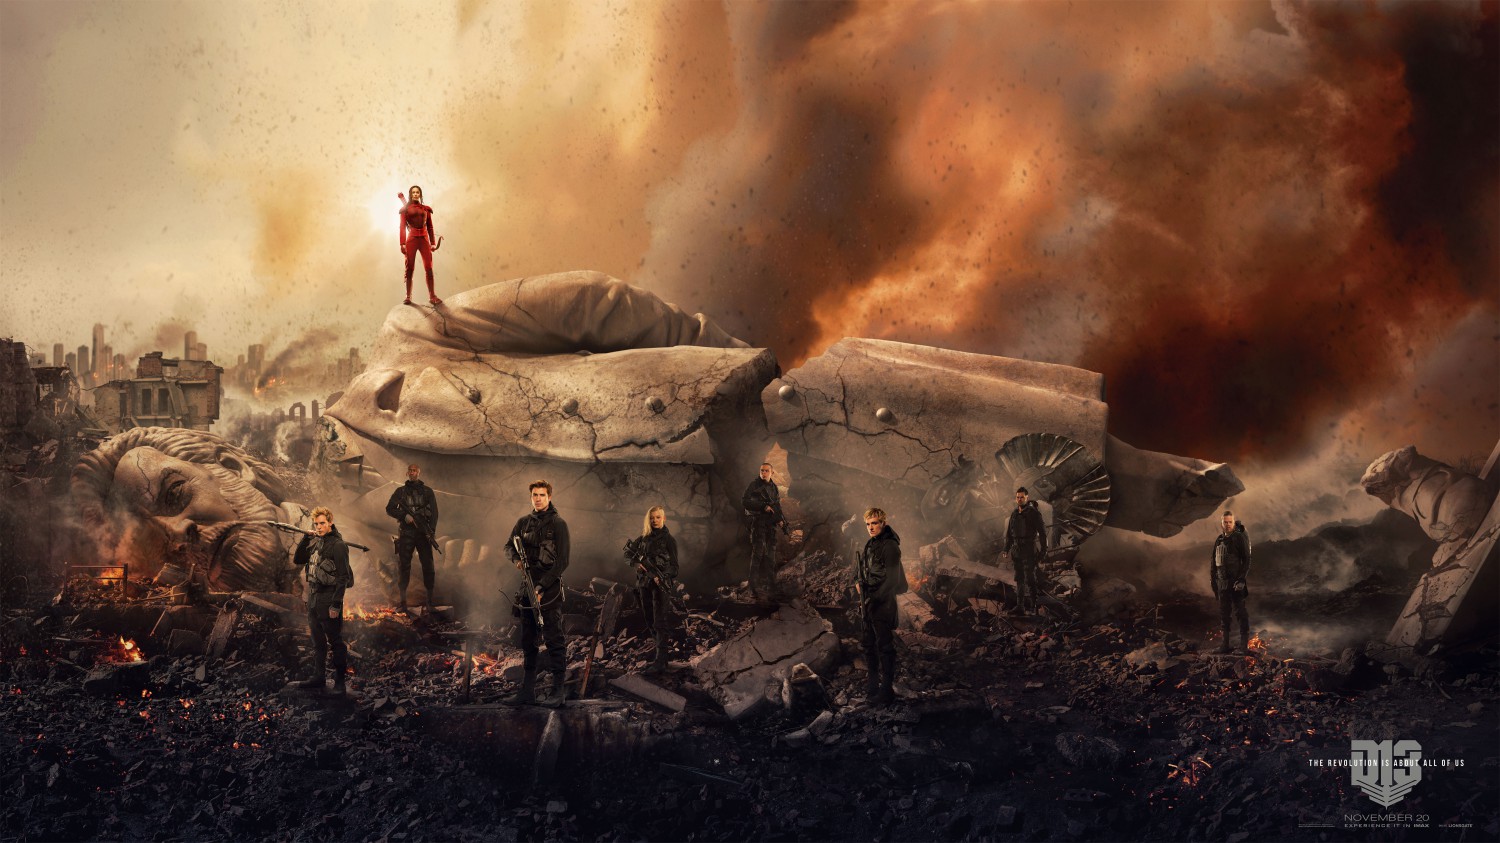 Extra Large Movie Poster Image for The Hunger Games: Mockingjay - Part 2 (#19 of 29)